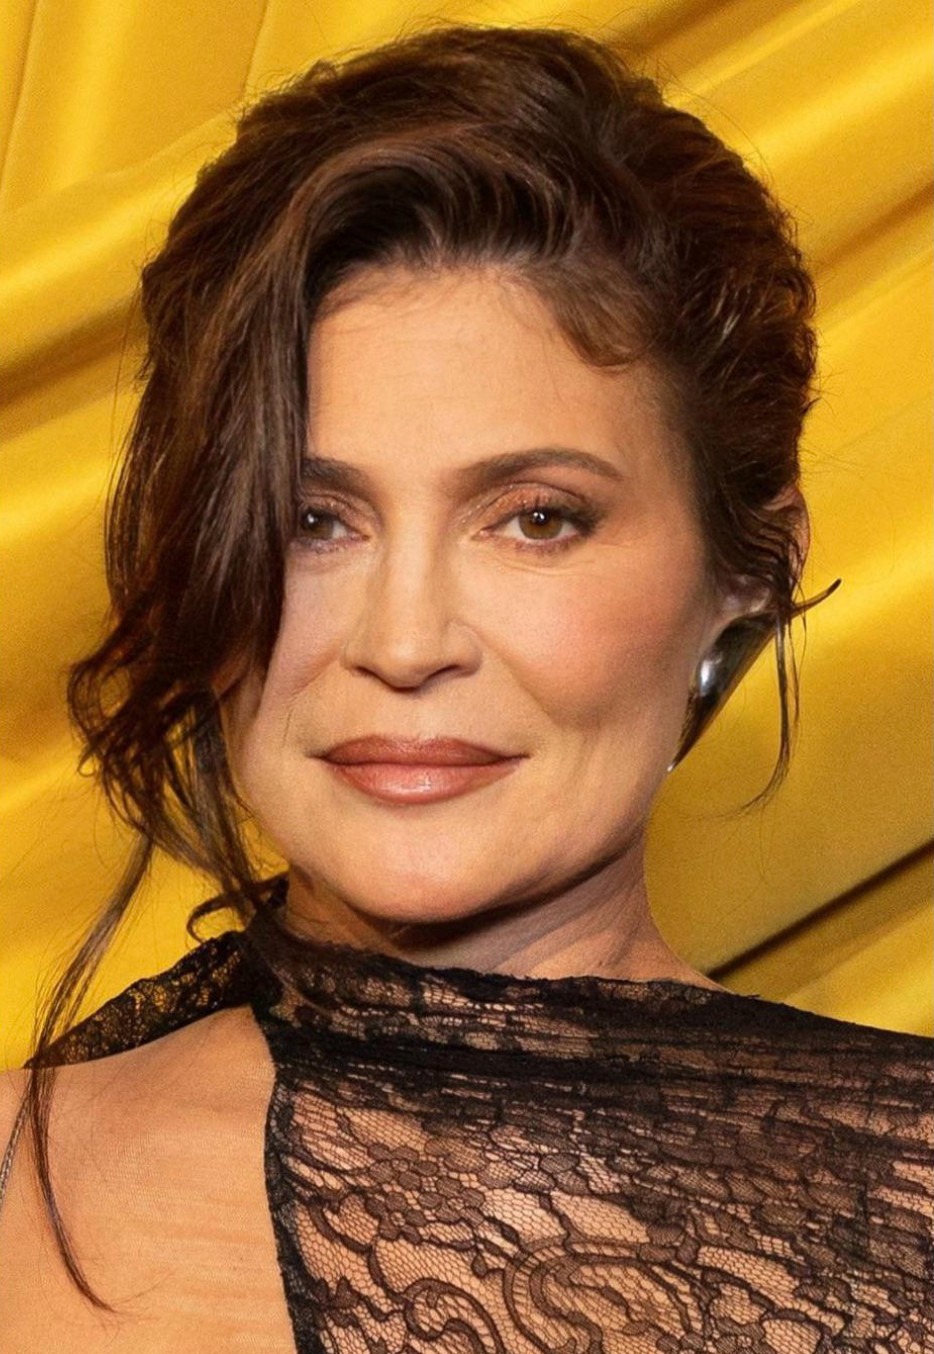 See what the Kardashian & Jenner sisters ‘will look like in 30 years’ in shocking new photos